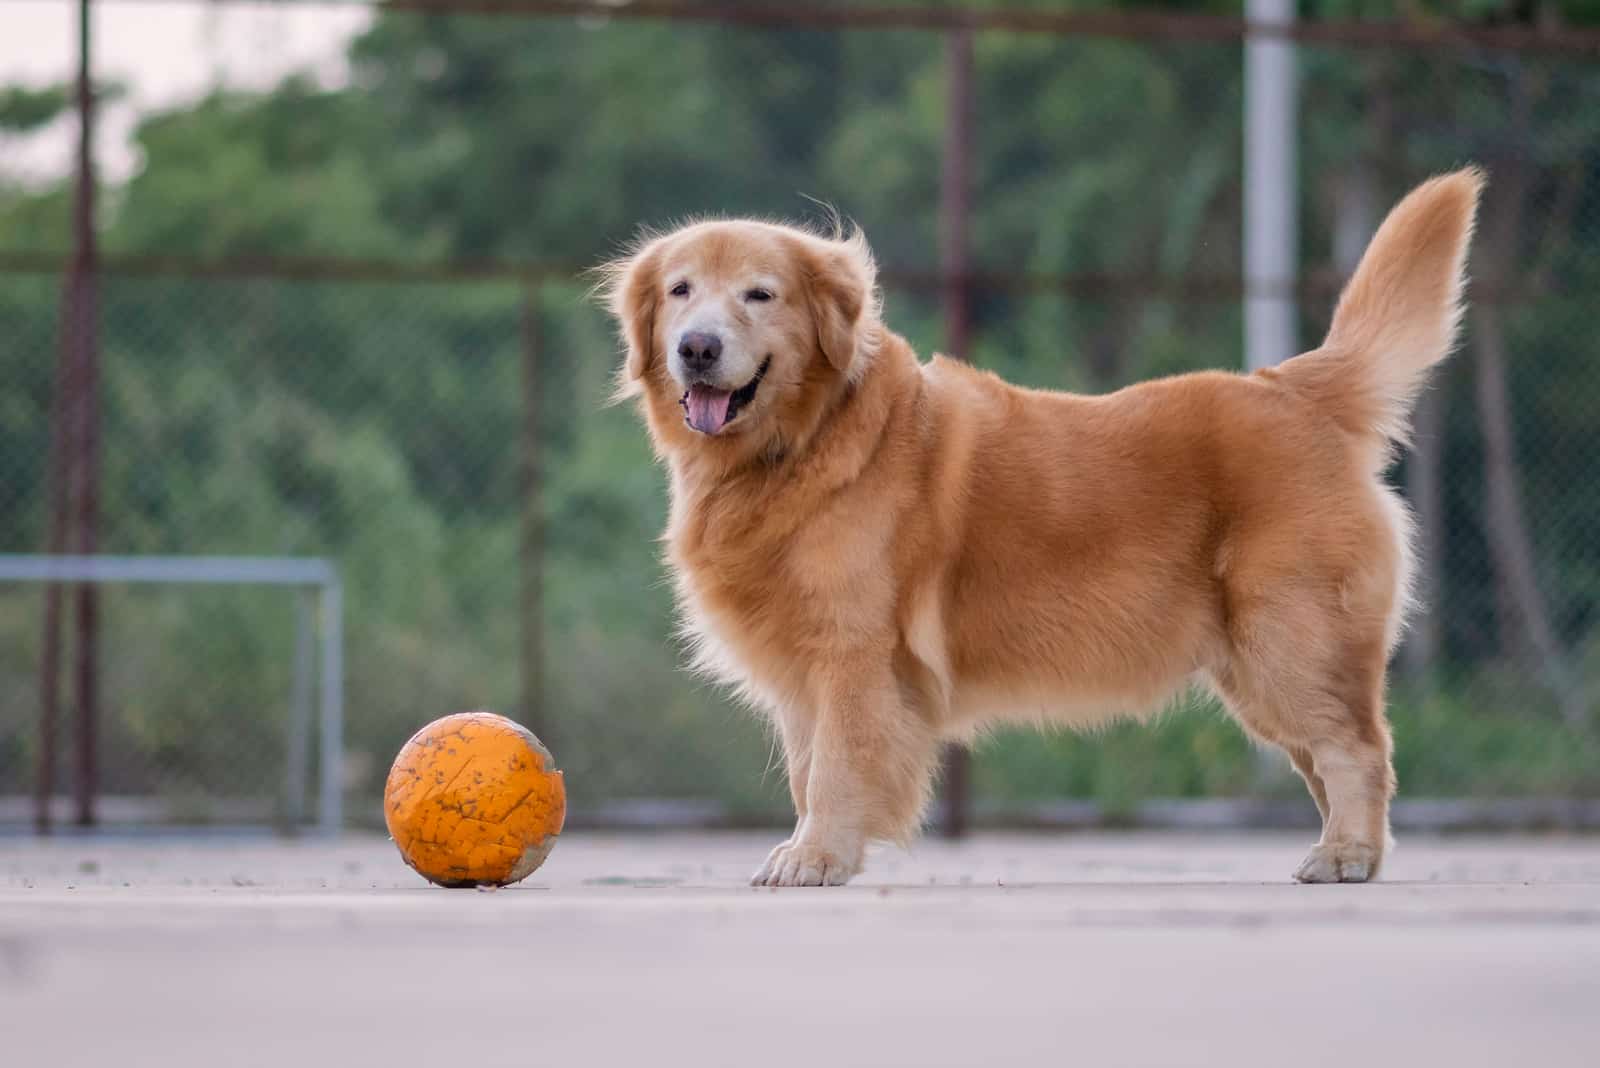 Dog playing with old orange soccer ball